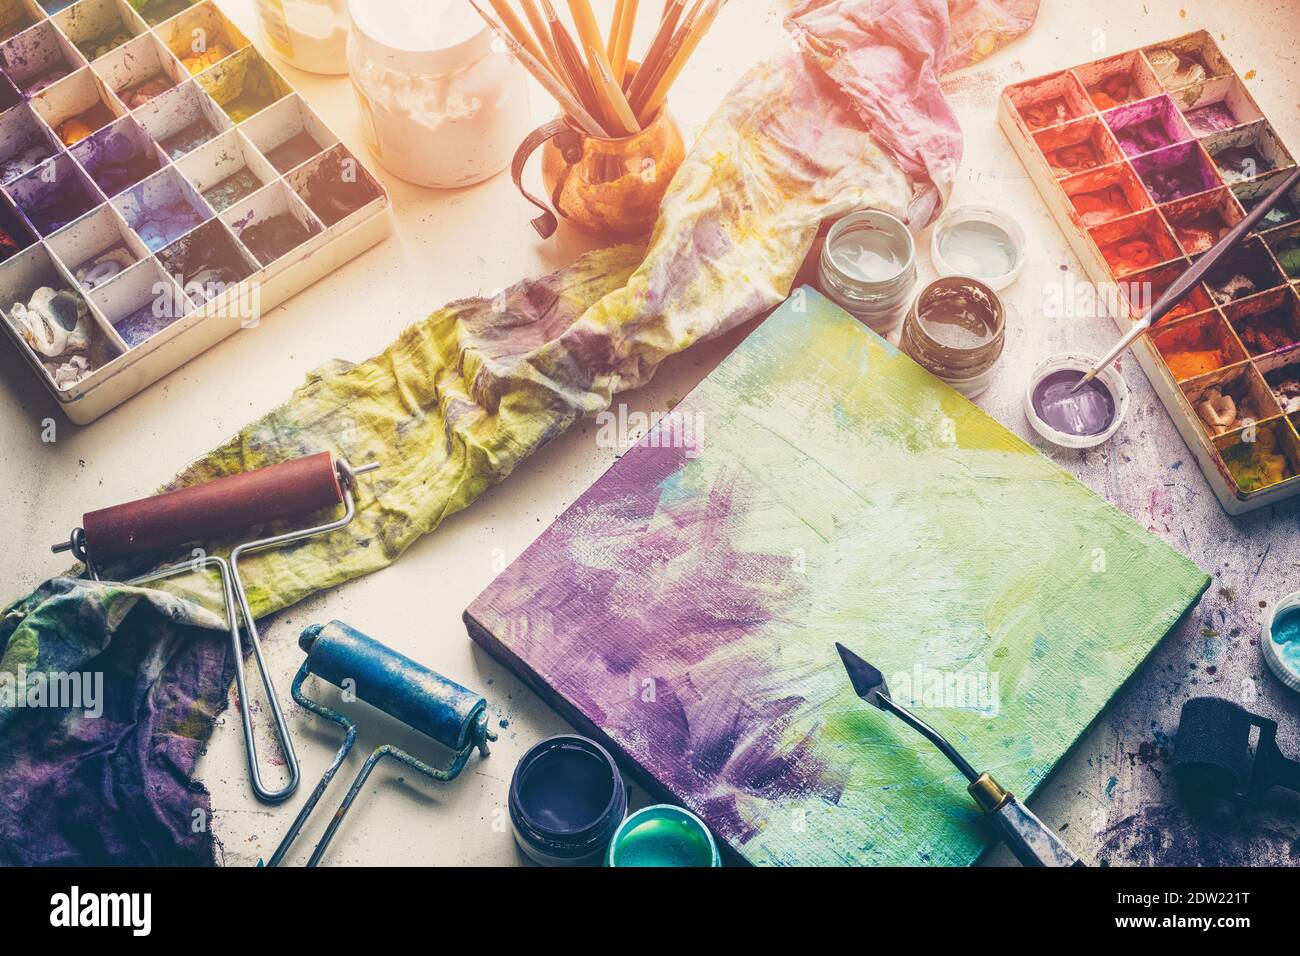 https://c8.alamy.com/comp/2DW221T/artistic-equipment-canvas-and-palette-knife-paint-brushes-multicolored-paints-in-artist-studio-top-view-2DW221T.jpg